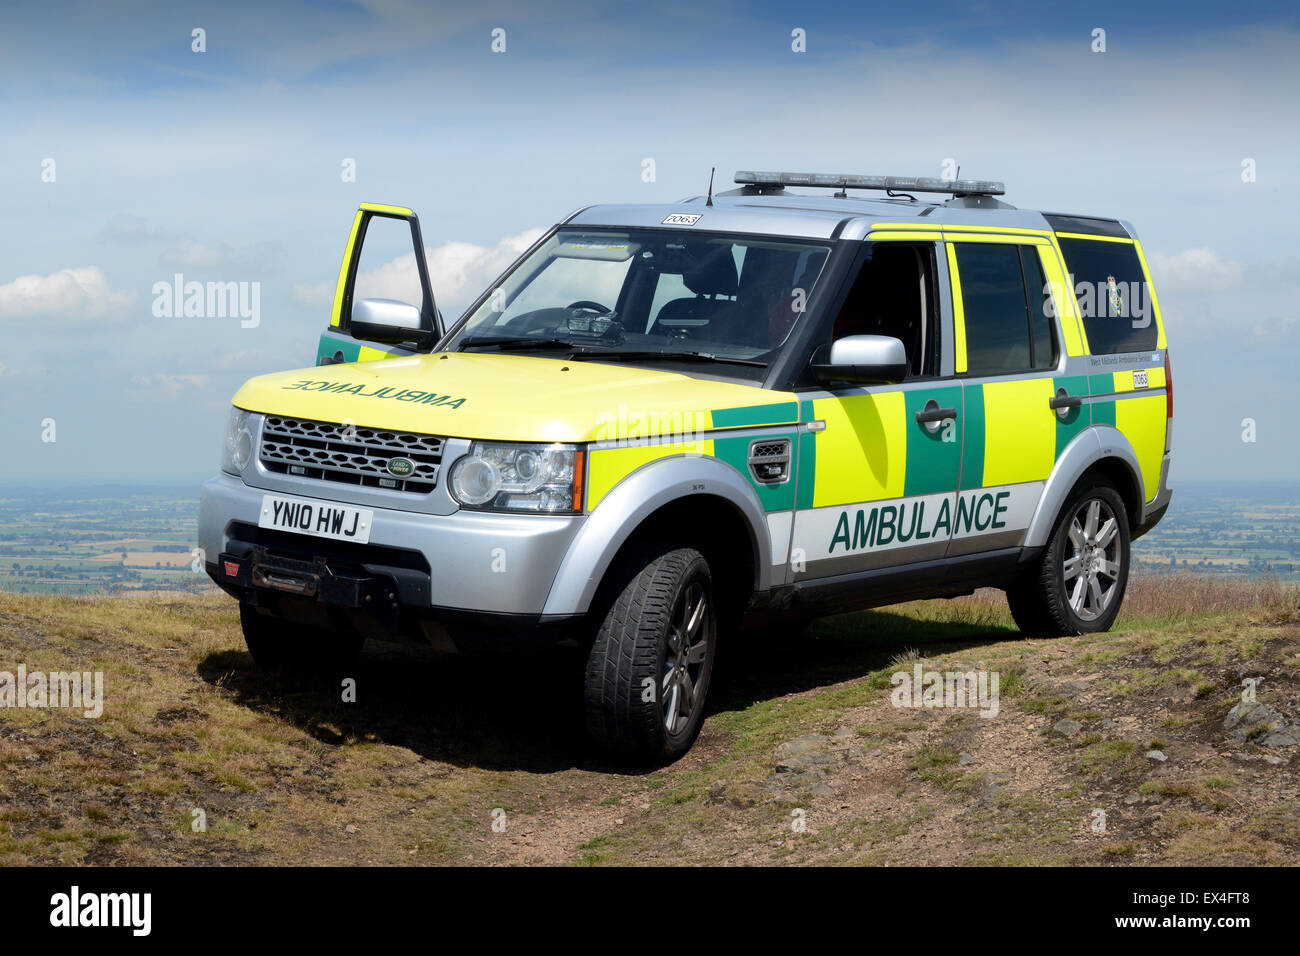 West Midlands Ambulance Service Land Rover rescue vehicle on the Wrekin Hill in Shropshire Stock Photo